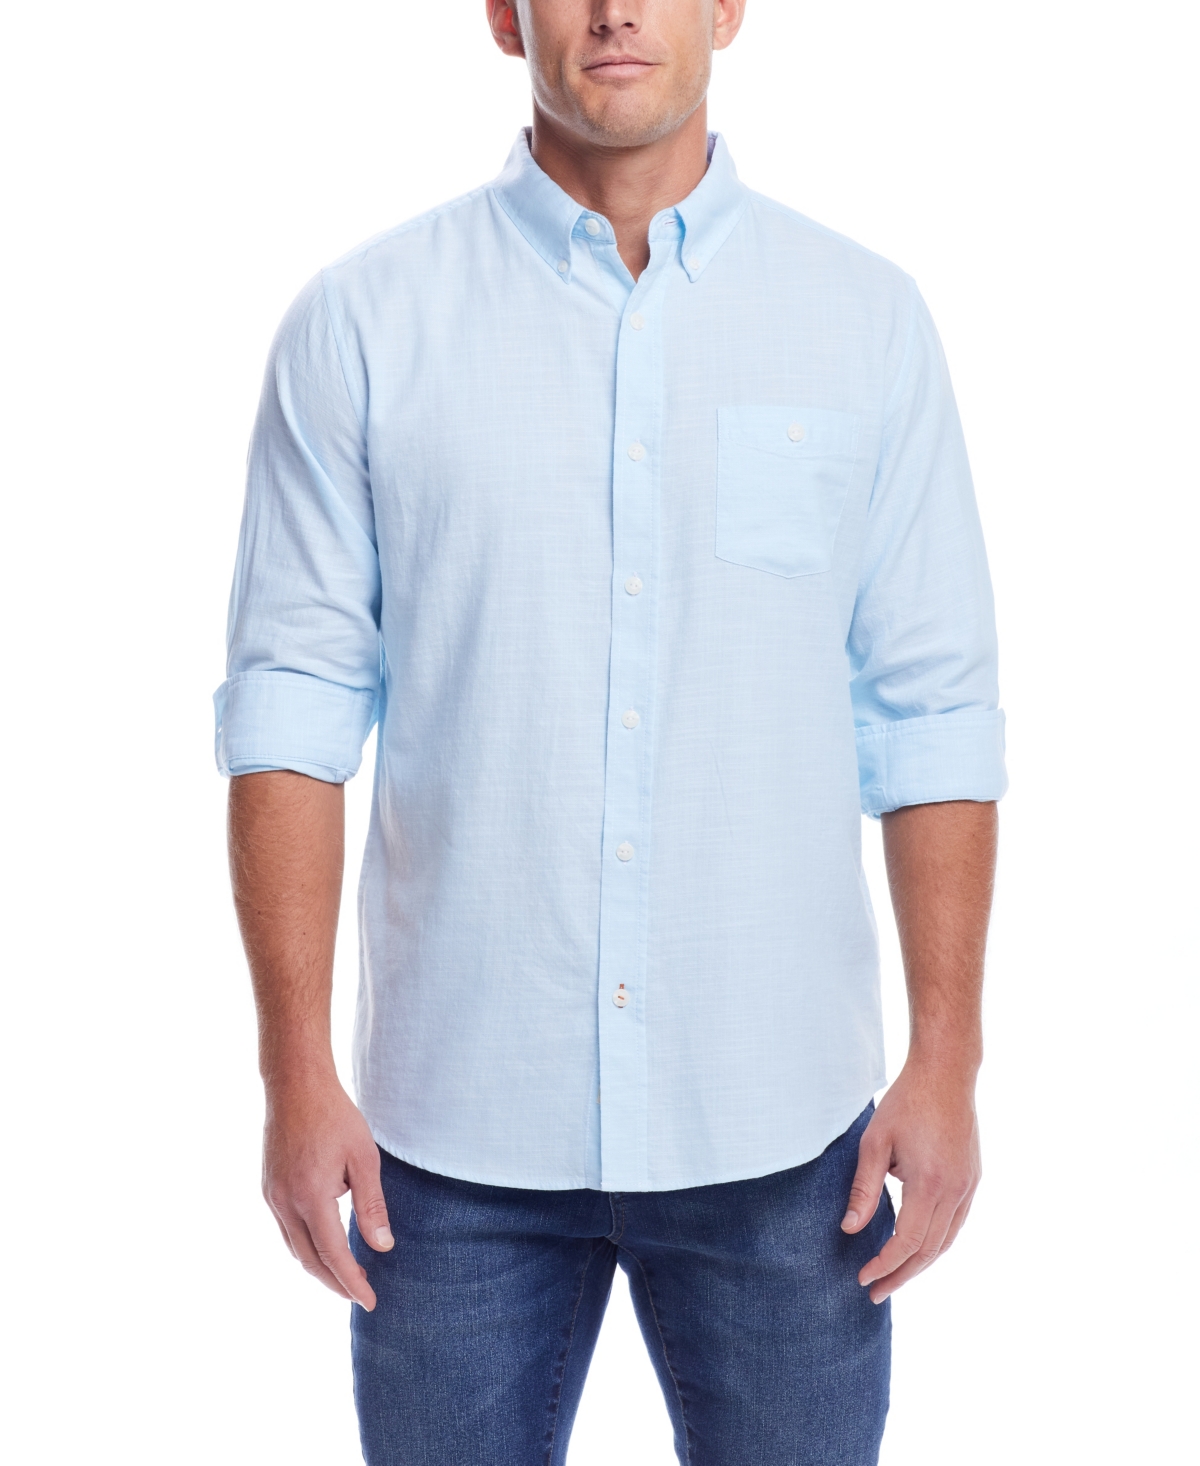 Men's Long Sleeve Solid Cotton Twill Shirt - White